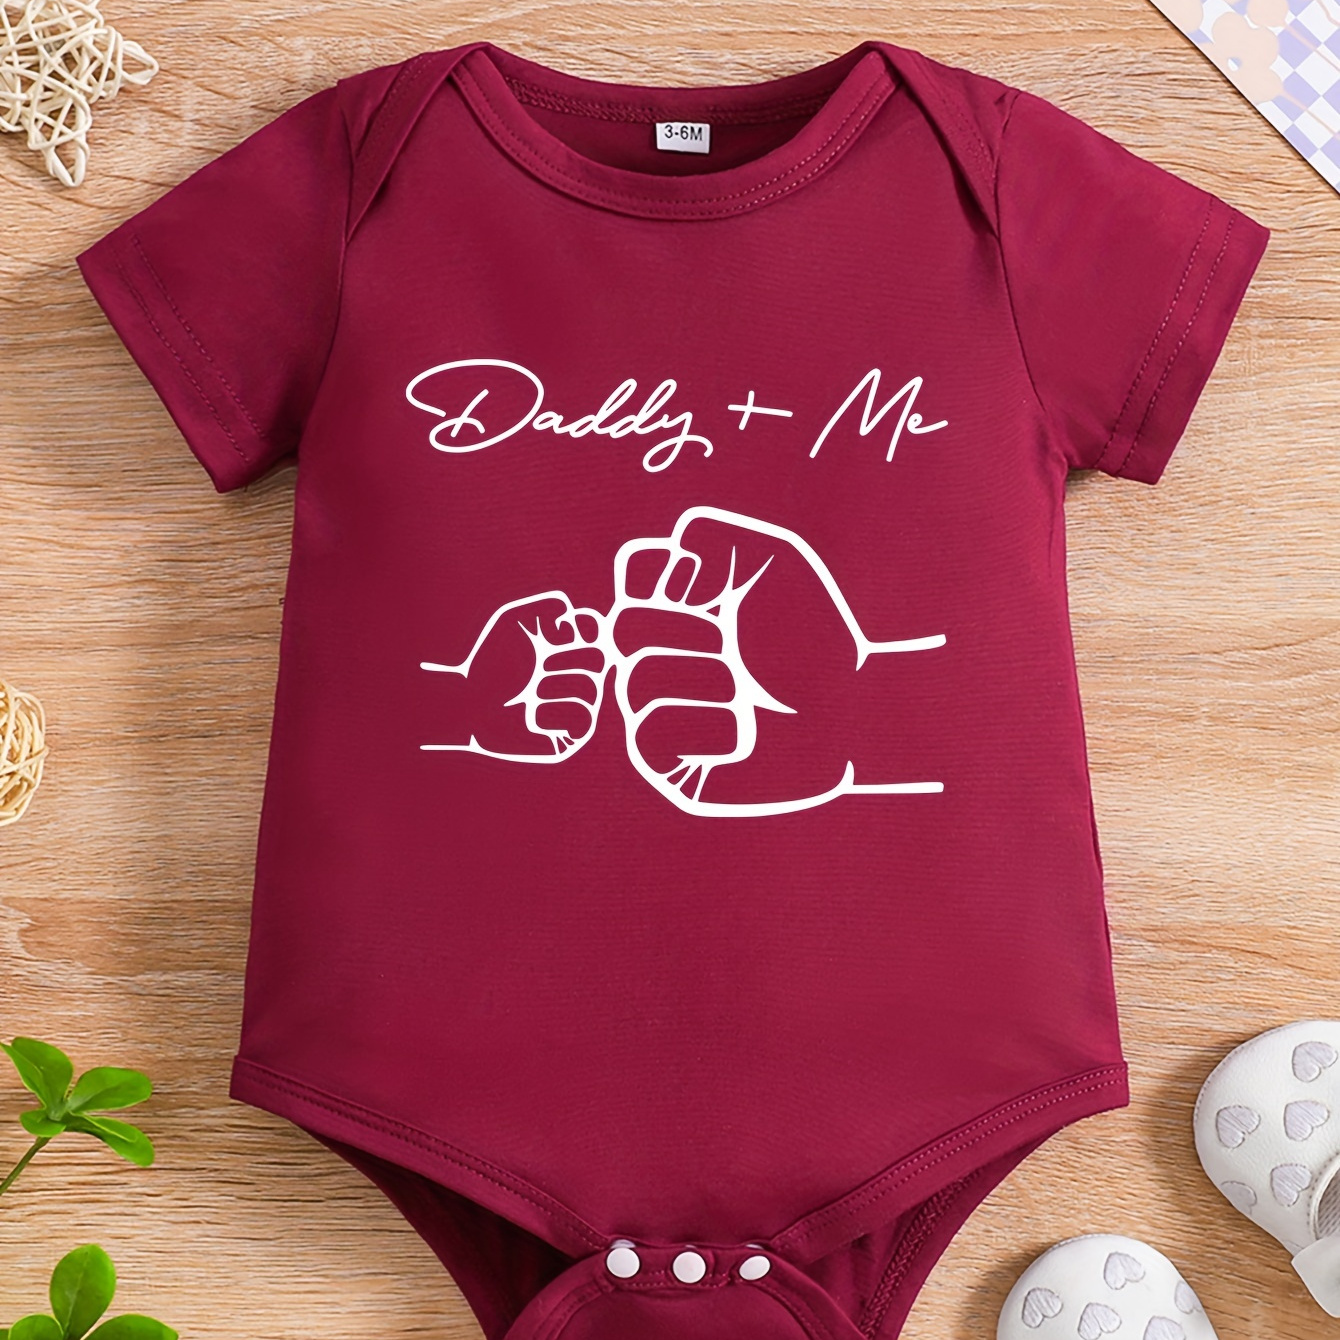 

Daddy & Me & Fists Graphic Print, Newborn Baby Girls' Casual & Comfy Short Sleeve Crew Neck Romper For Spring & Summer, Infant Girls' Clothing